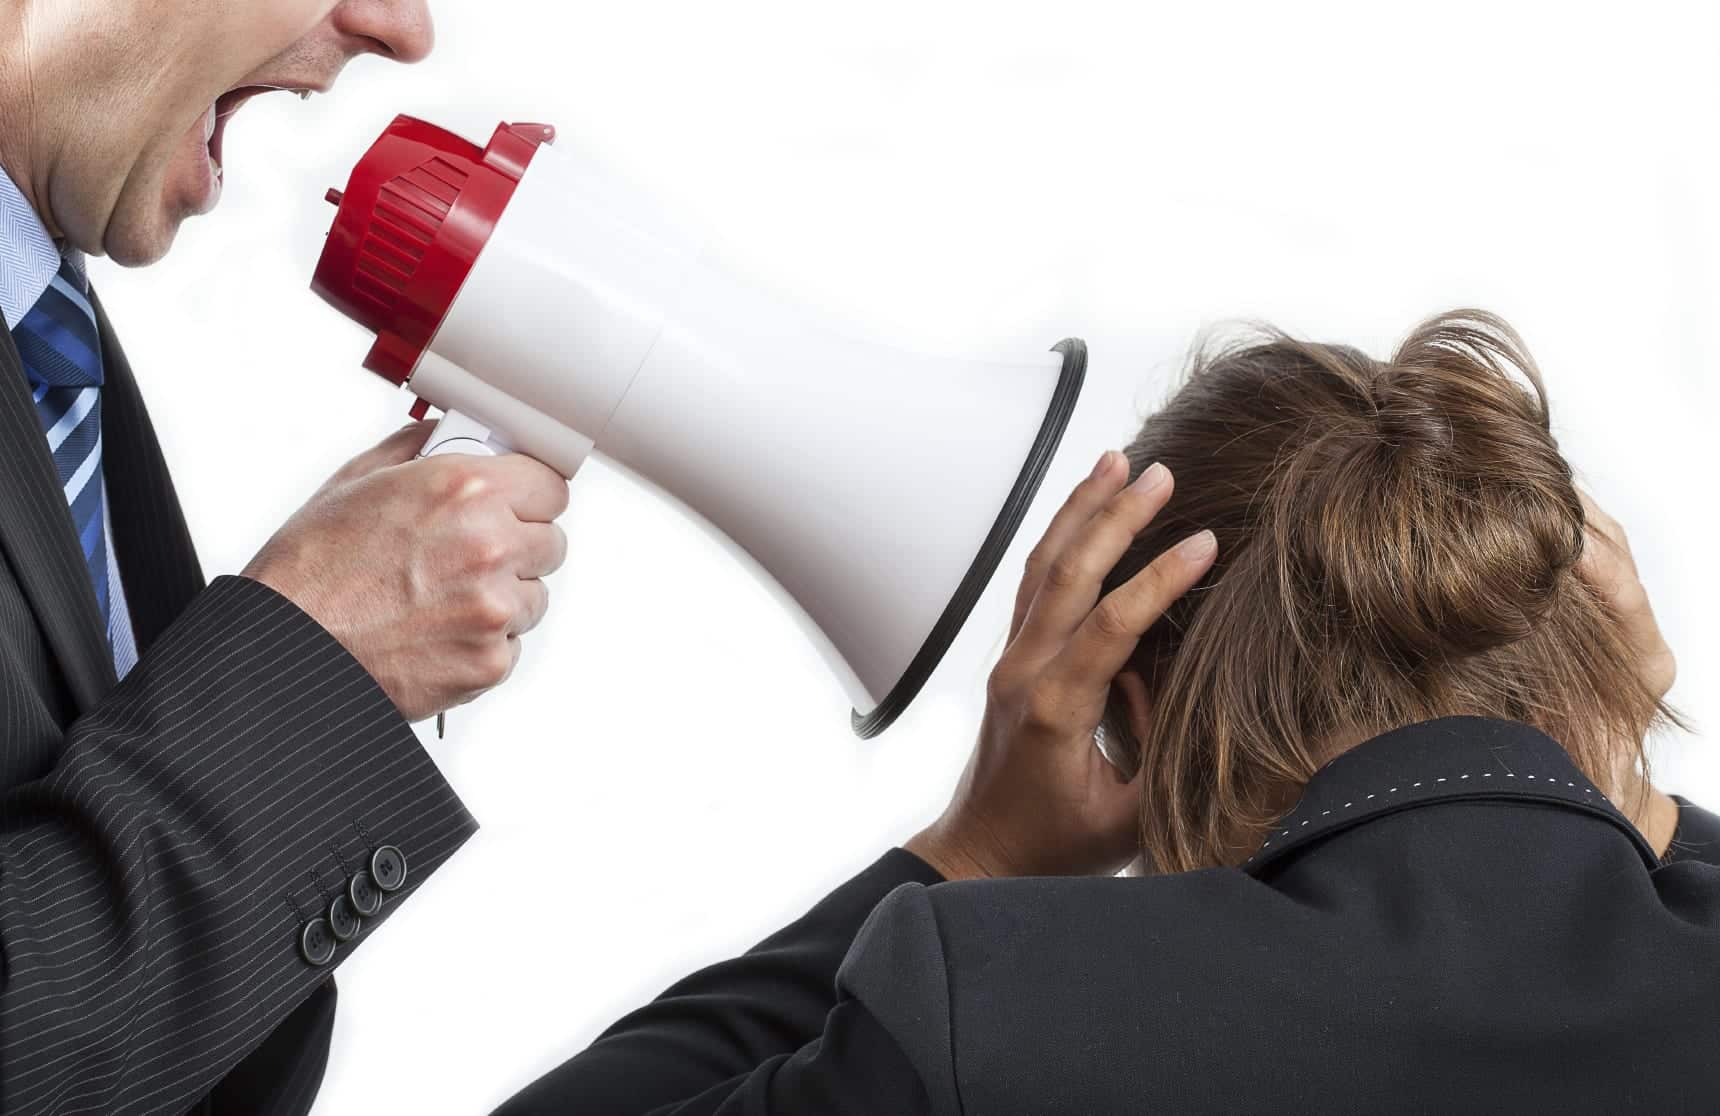 7 Subtle Signs of Workplace Bullying to Watch For In Your Business